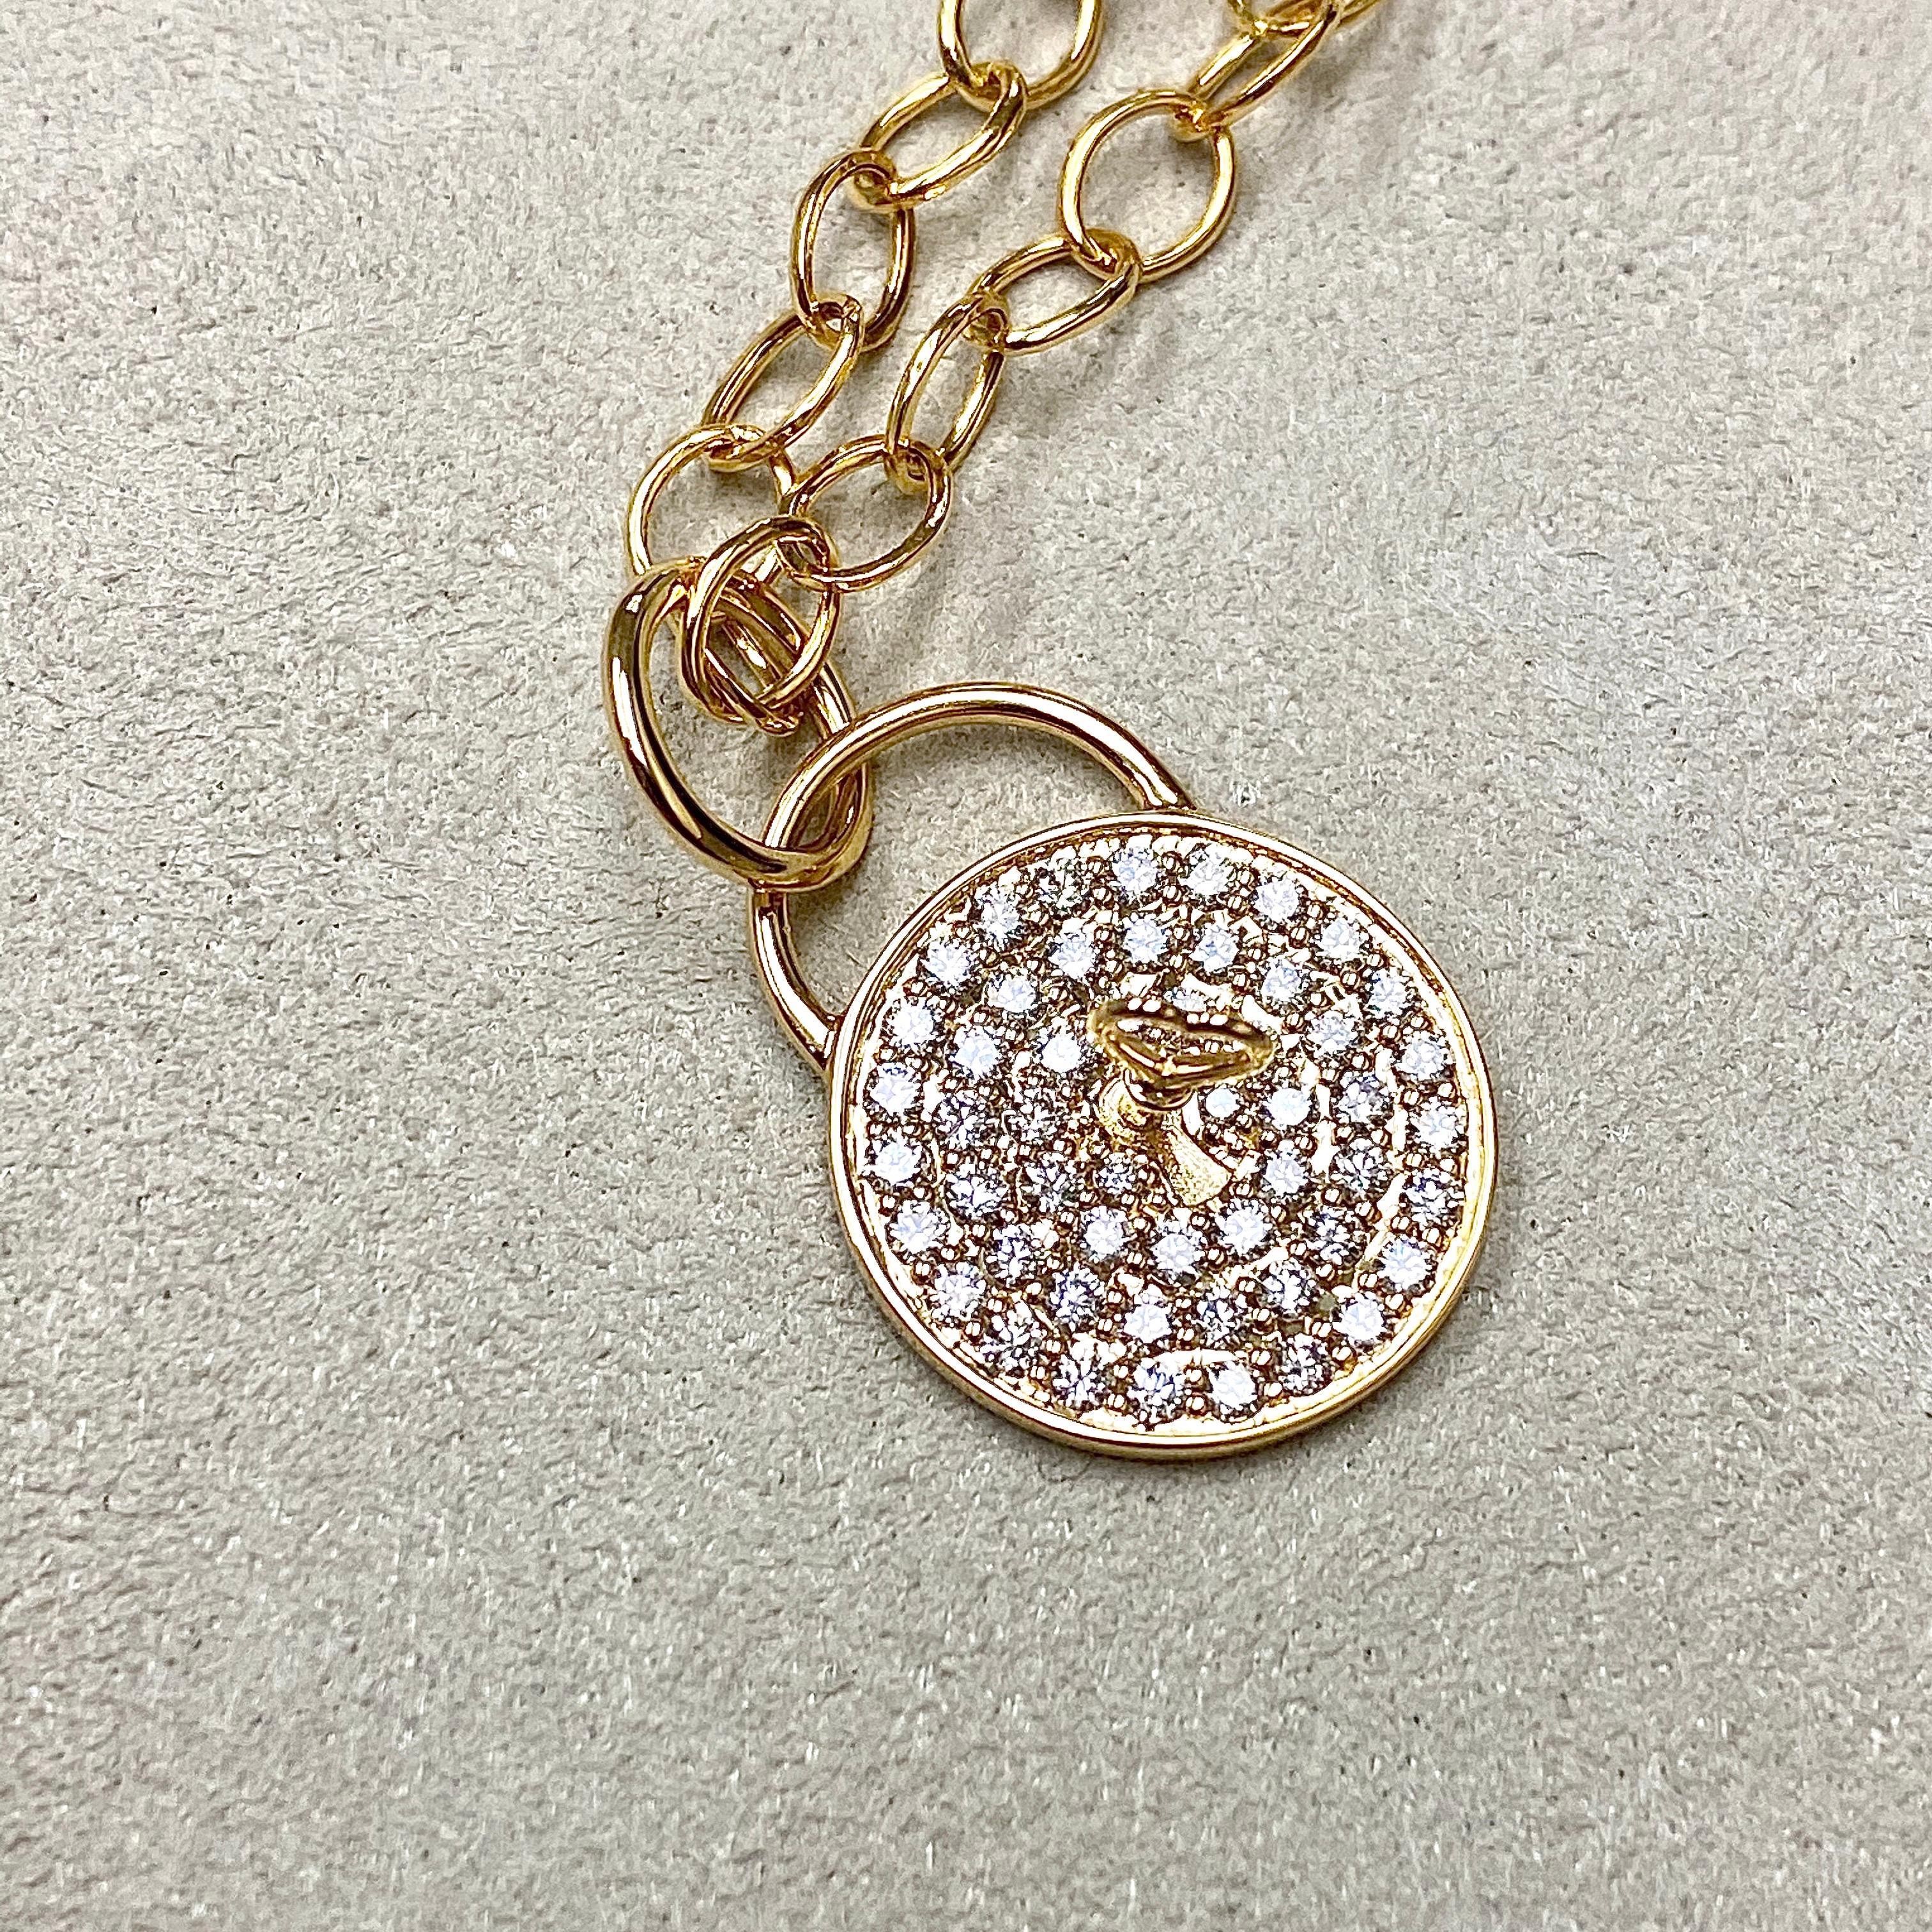 Created in 18 karat yellow gold
Love locked pendant with heart key
Champagne diamonds 0.60 ct approx
Limited edition
Chain sold separately

About the Designers ~ Dharmesh & Namrata

Drawing inspiration from little things, Dharmesh & Namrata Kothari